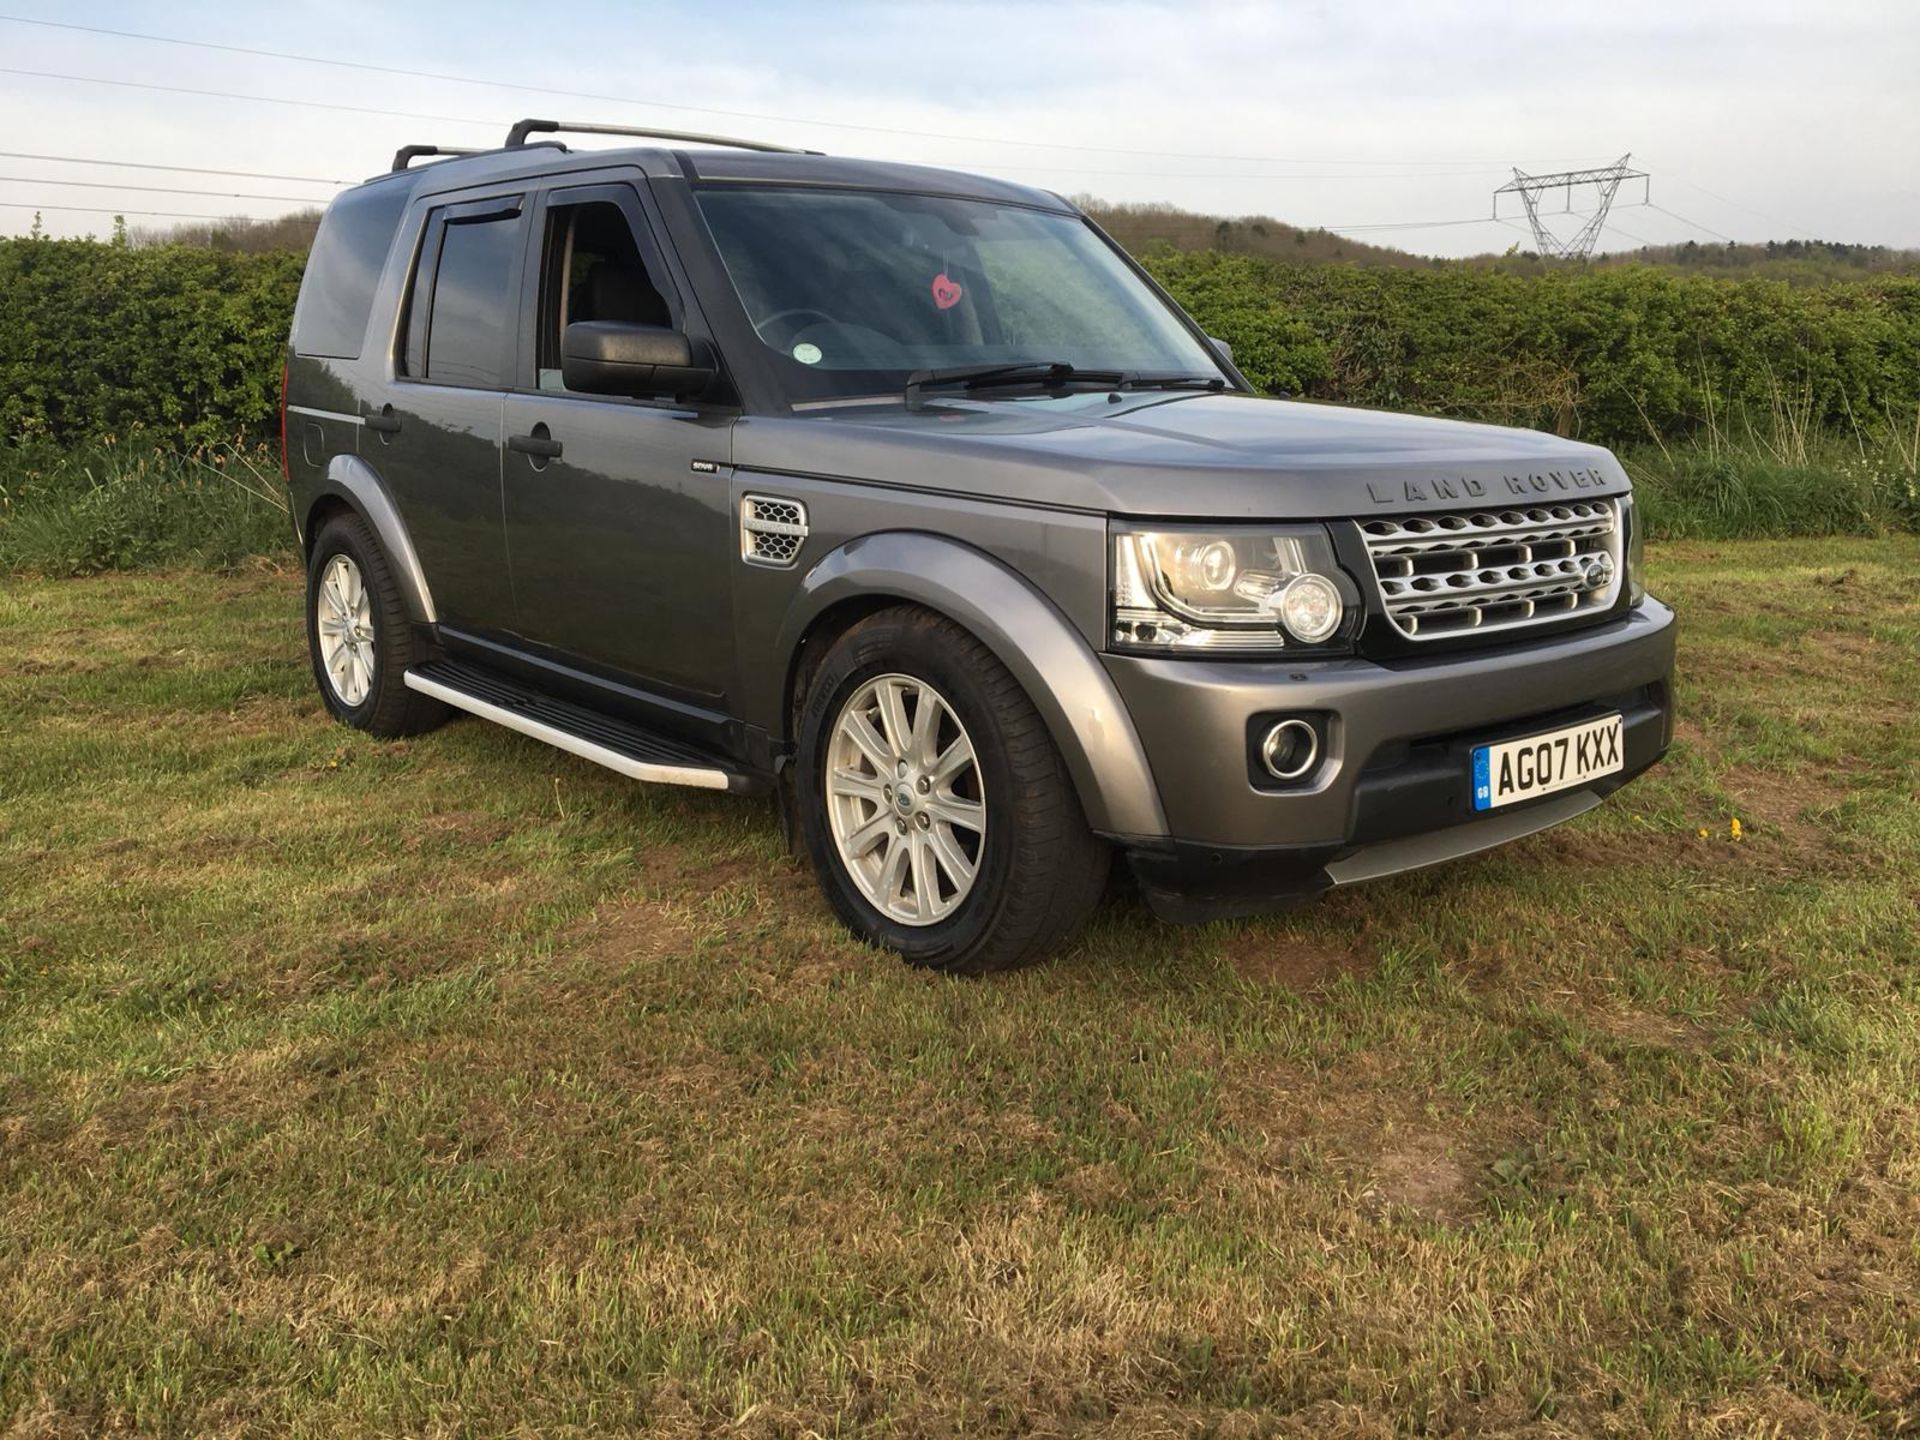 2007/07 REG LAND ROVER DISCOVERY 3 TDV6 SE AUTOMATIC 2.7 DIESEL 4X4, 7 SEAT FACELIFT LIGHTS *NO VAT* - Image 2 of 16